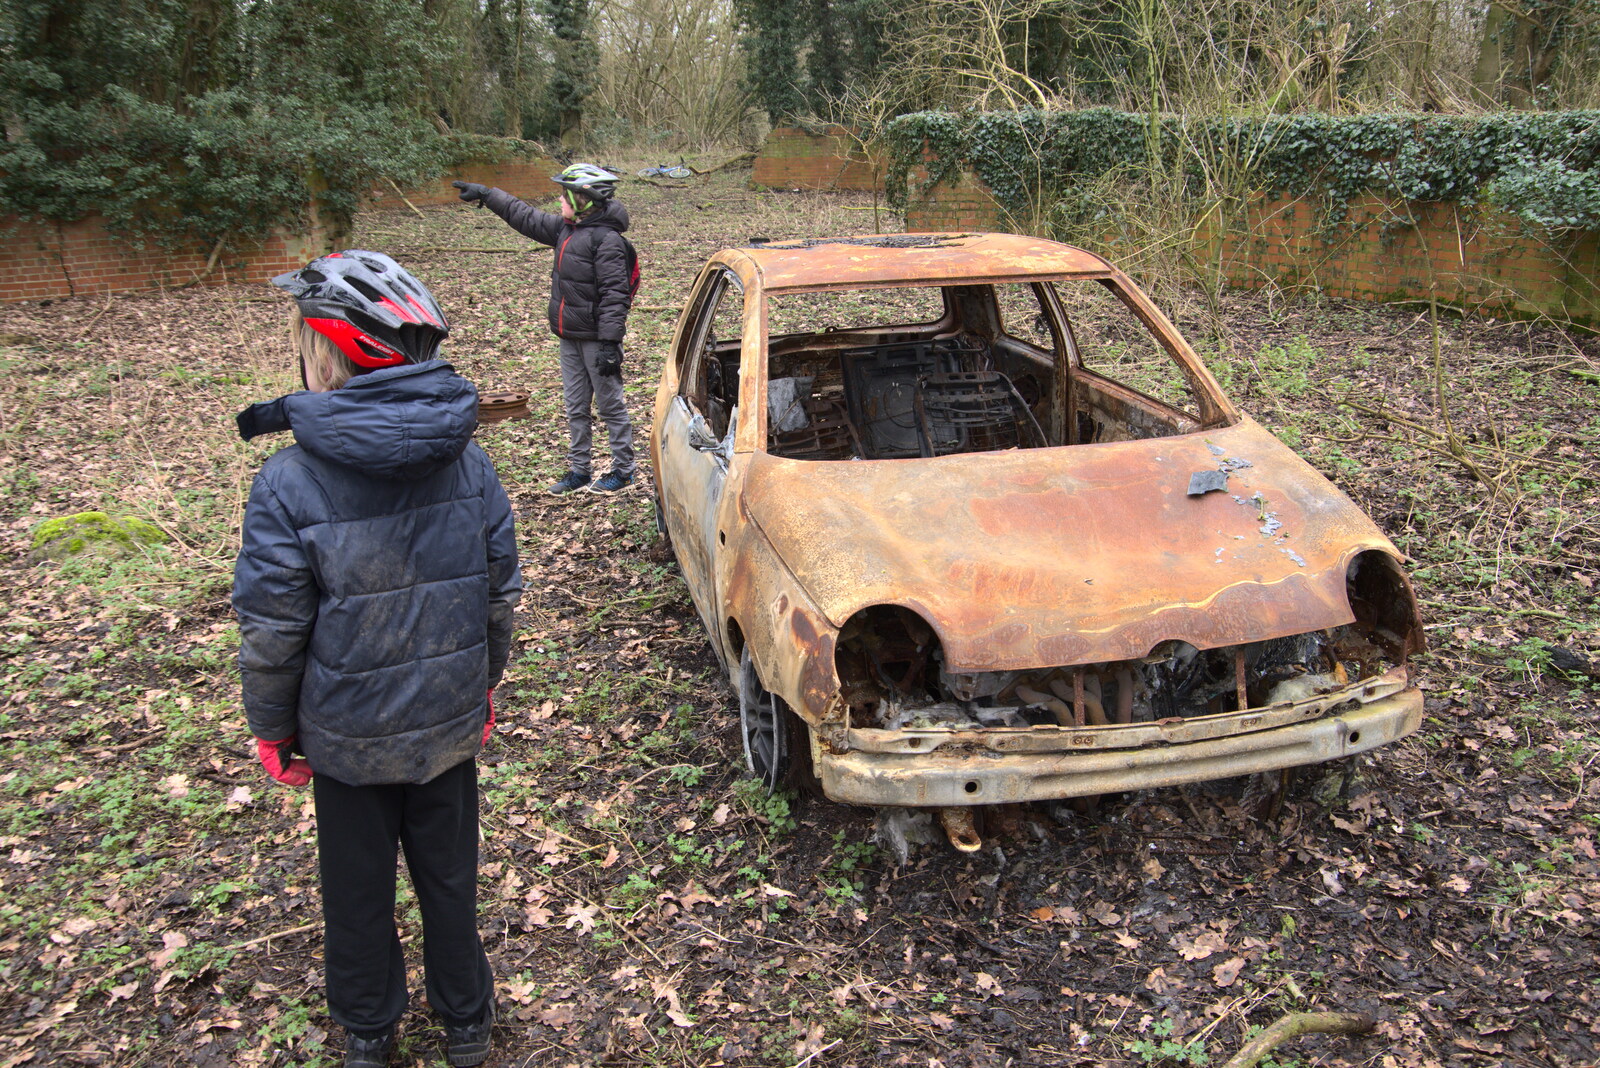 Fred points away from the burned car from The Old Sewage Works, The Avenue, Brome, Suffolk - 20th February 2021